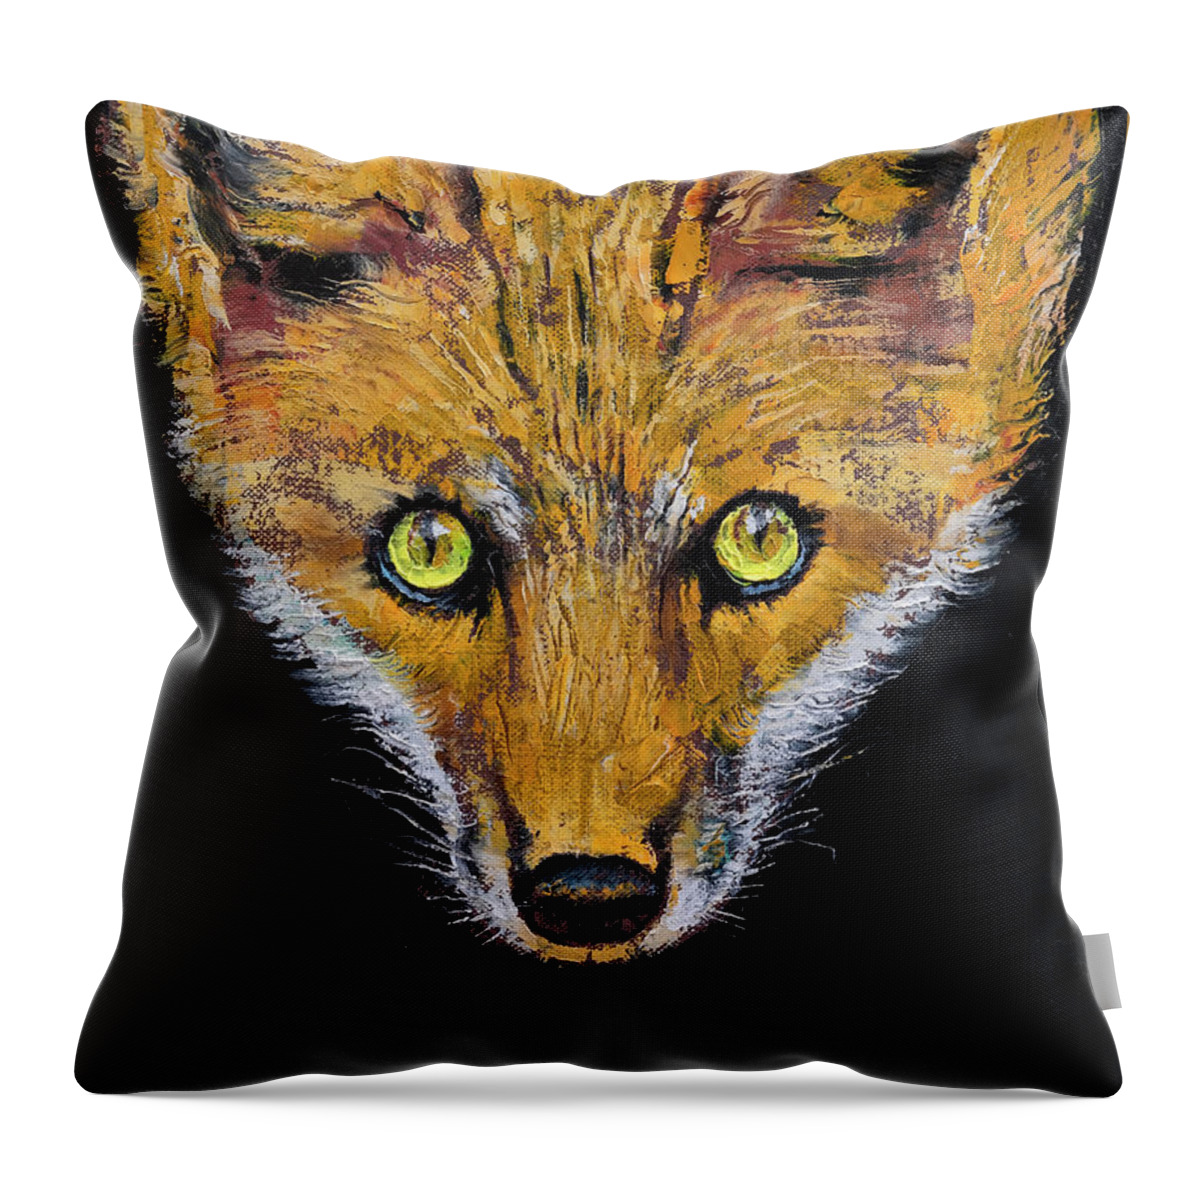 Fox Throw Pillow featuring the painting Clever Fox by Michael Creese